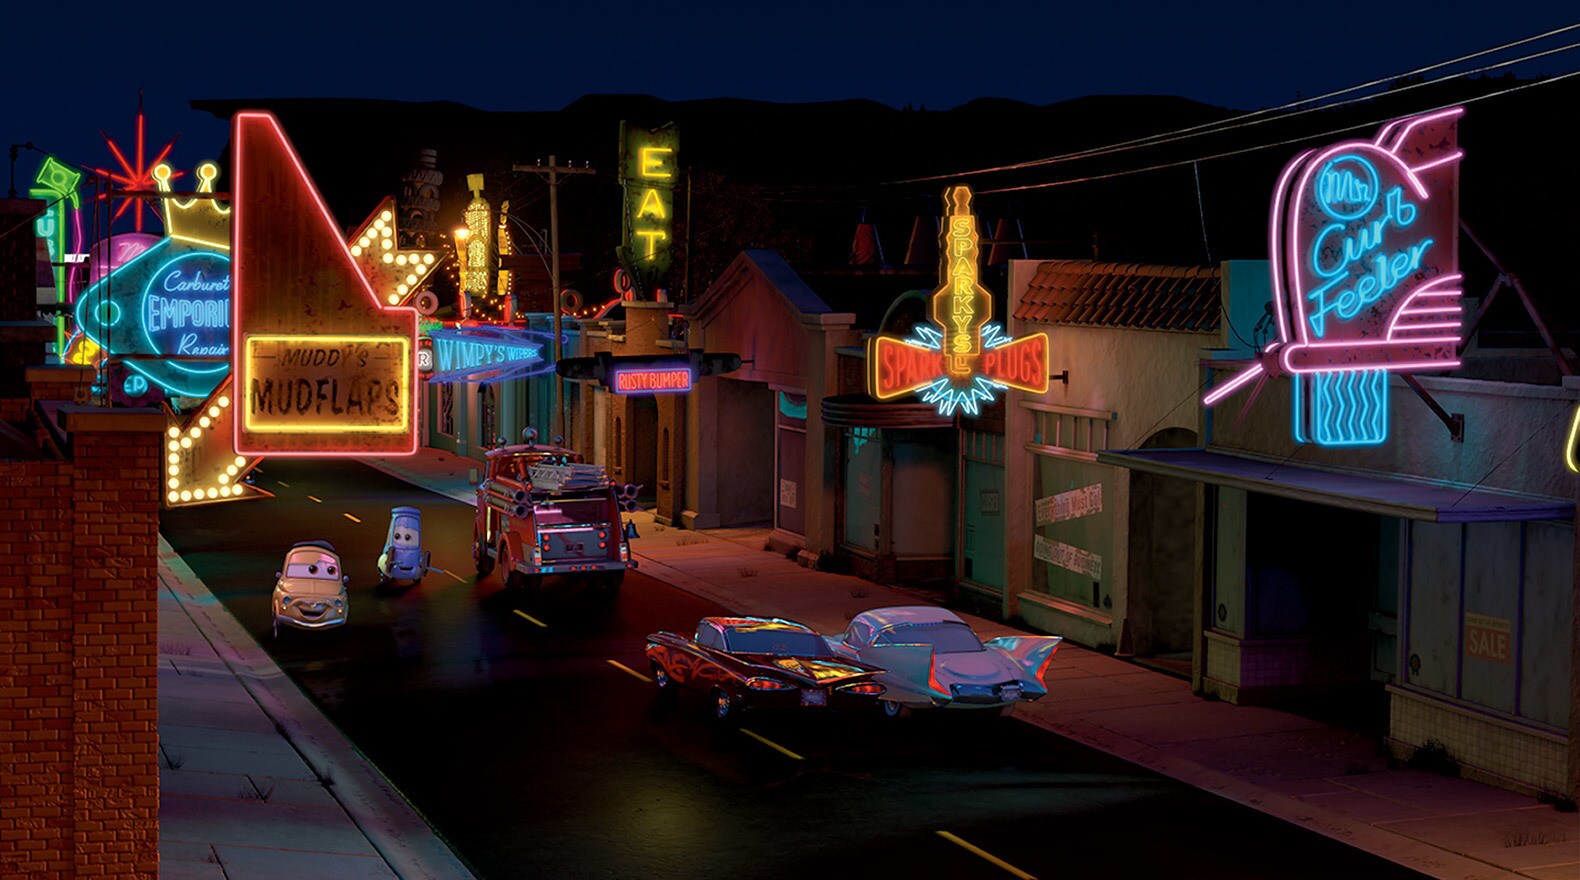 Lightning’s new road inspires everyone in Radiator Springs to spruce their town up.